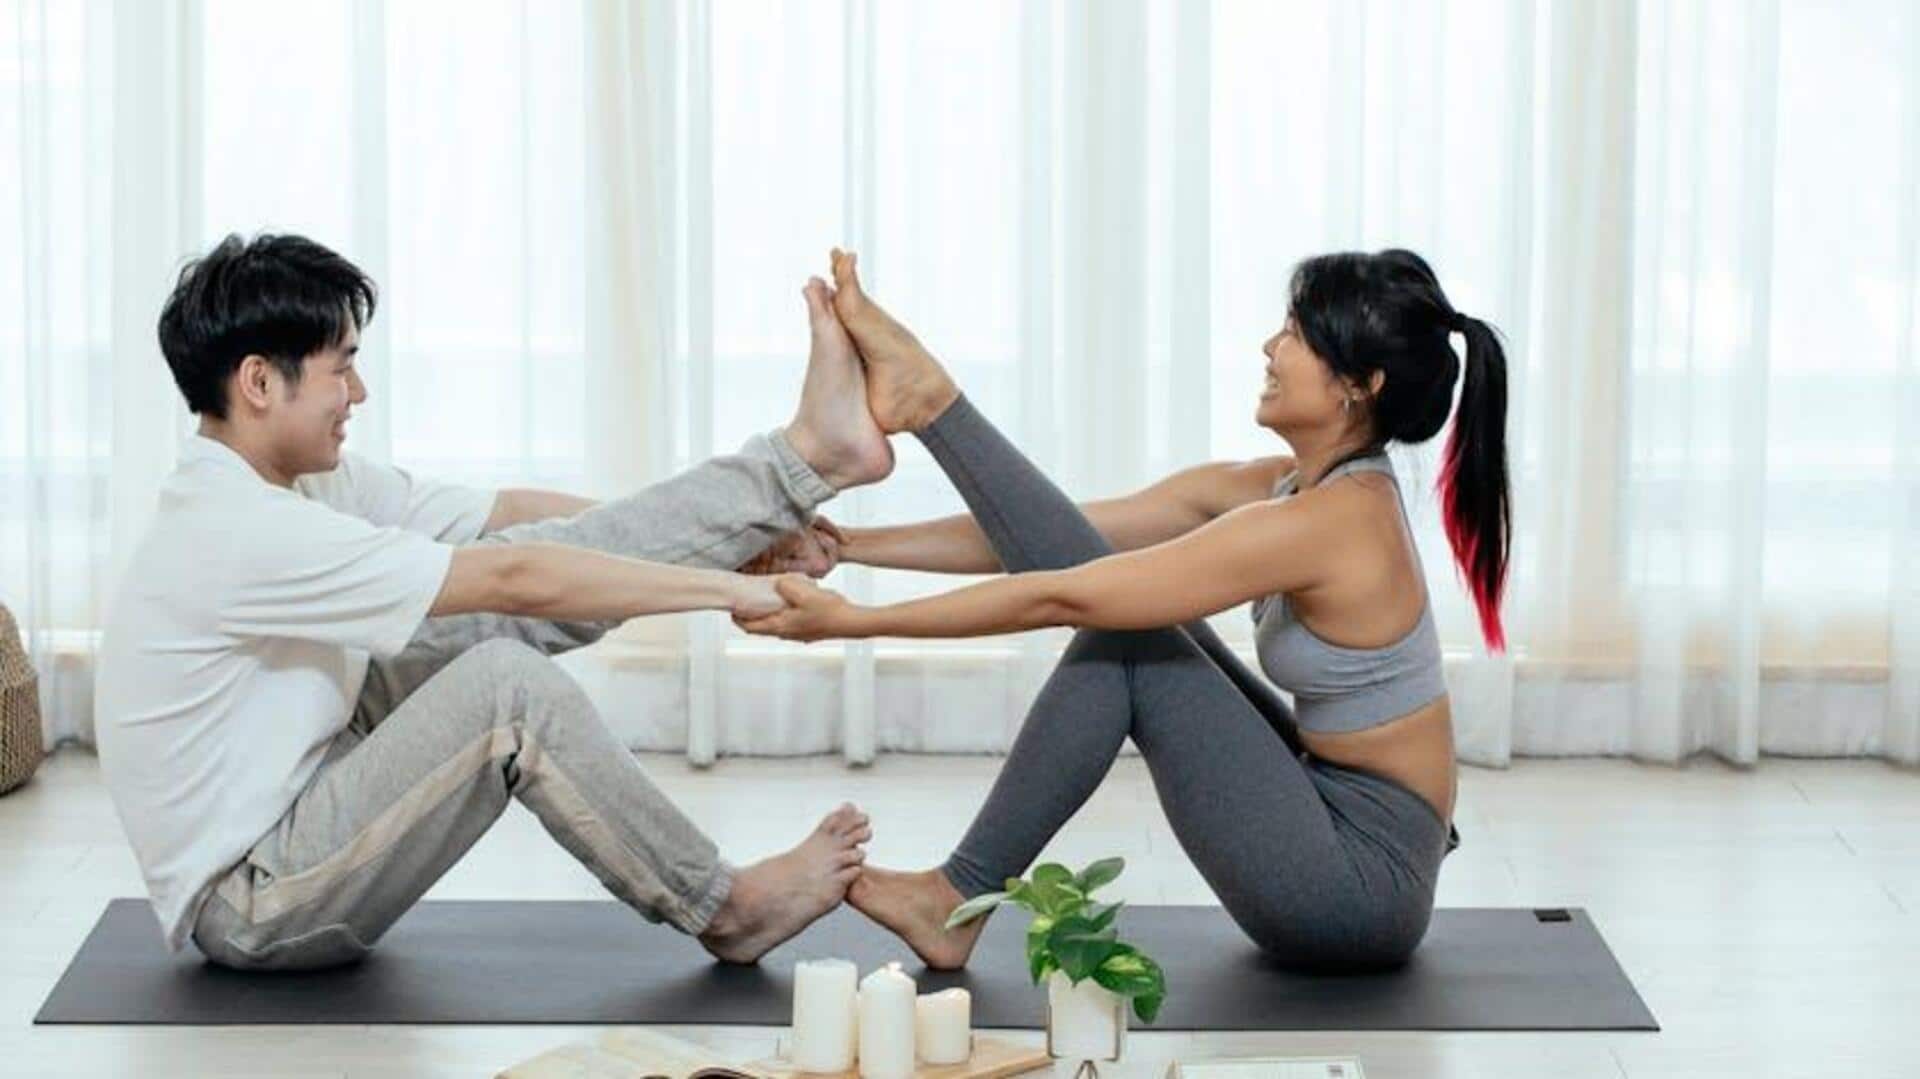 5 Yoga Poses That Double as Sexual Positions - DoYou